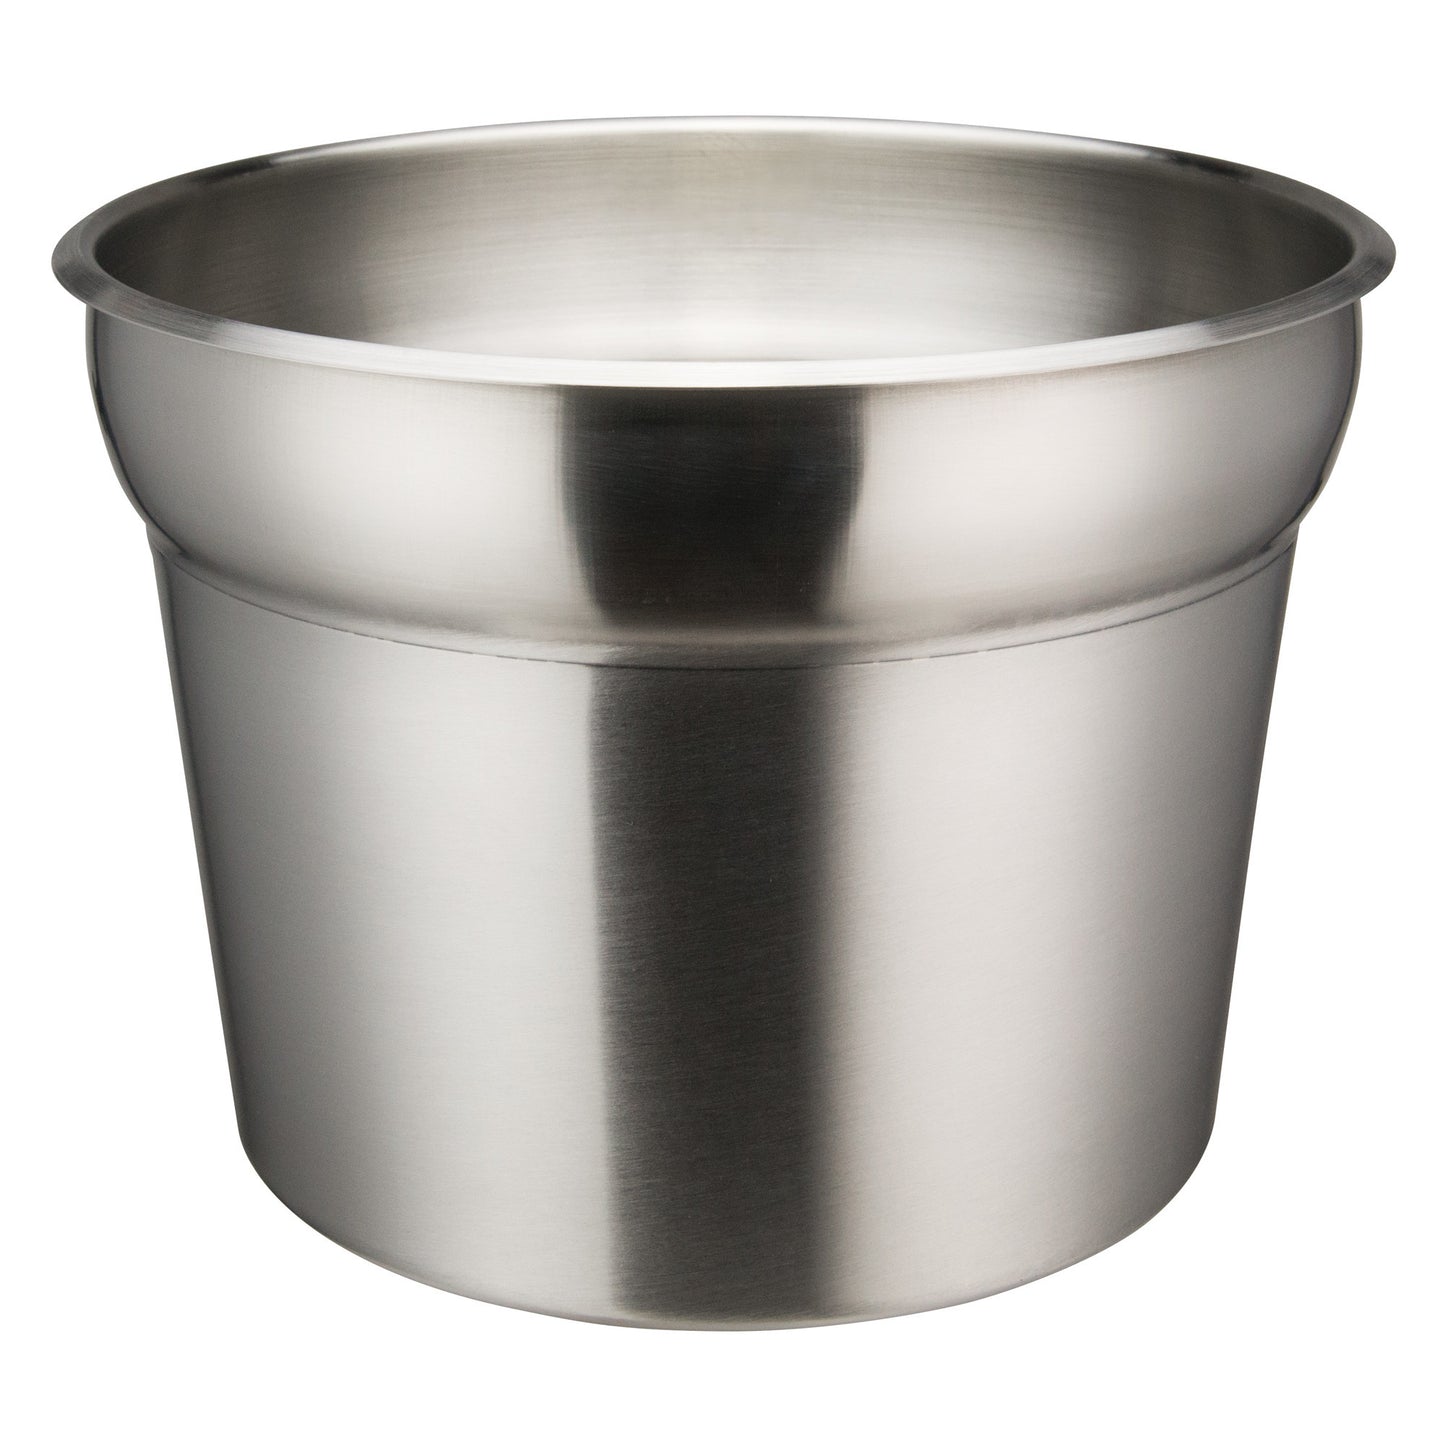 INSN-11 - Winco Prime Stainless Steel Inset - 11 Quart